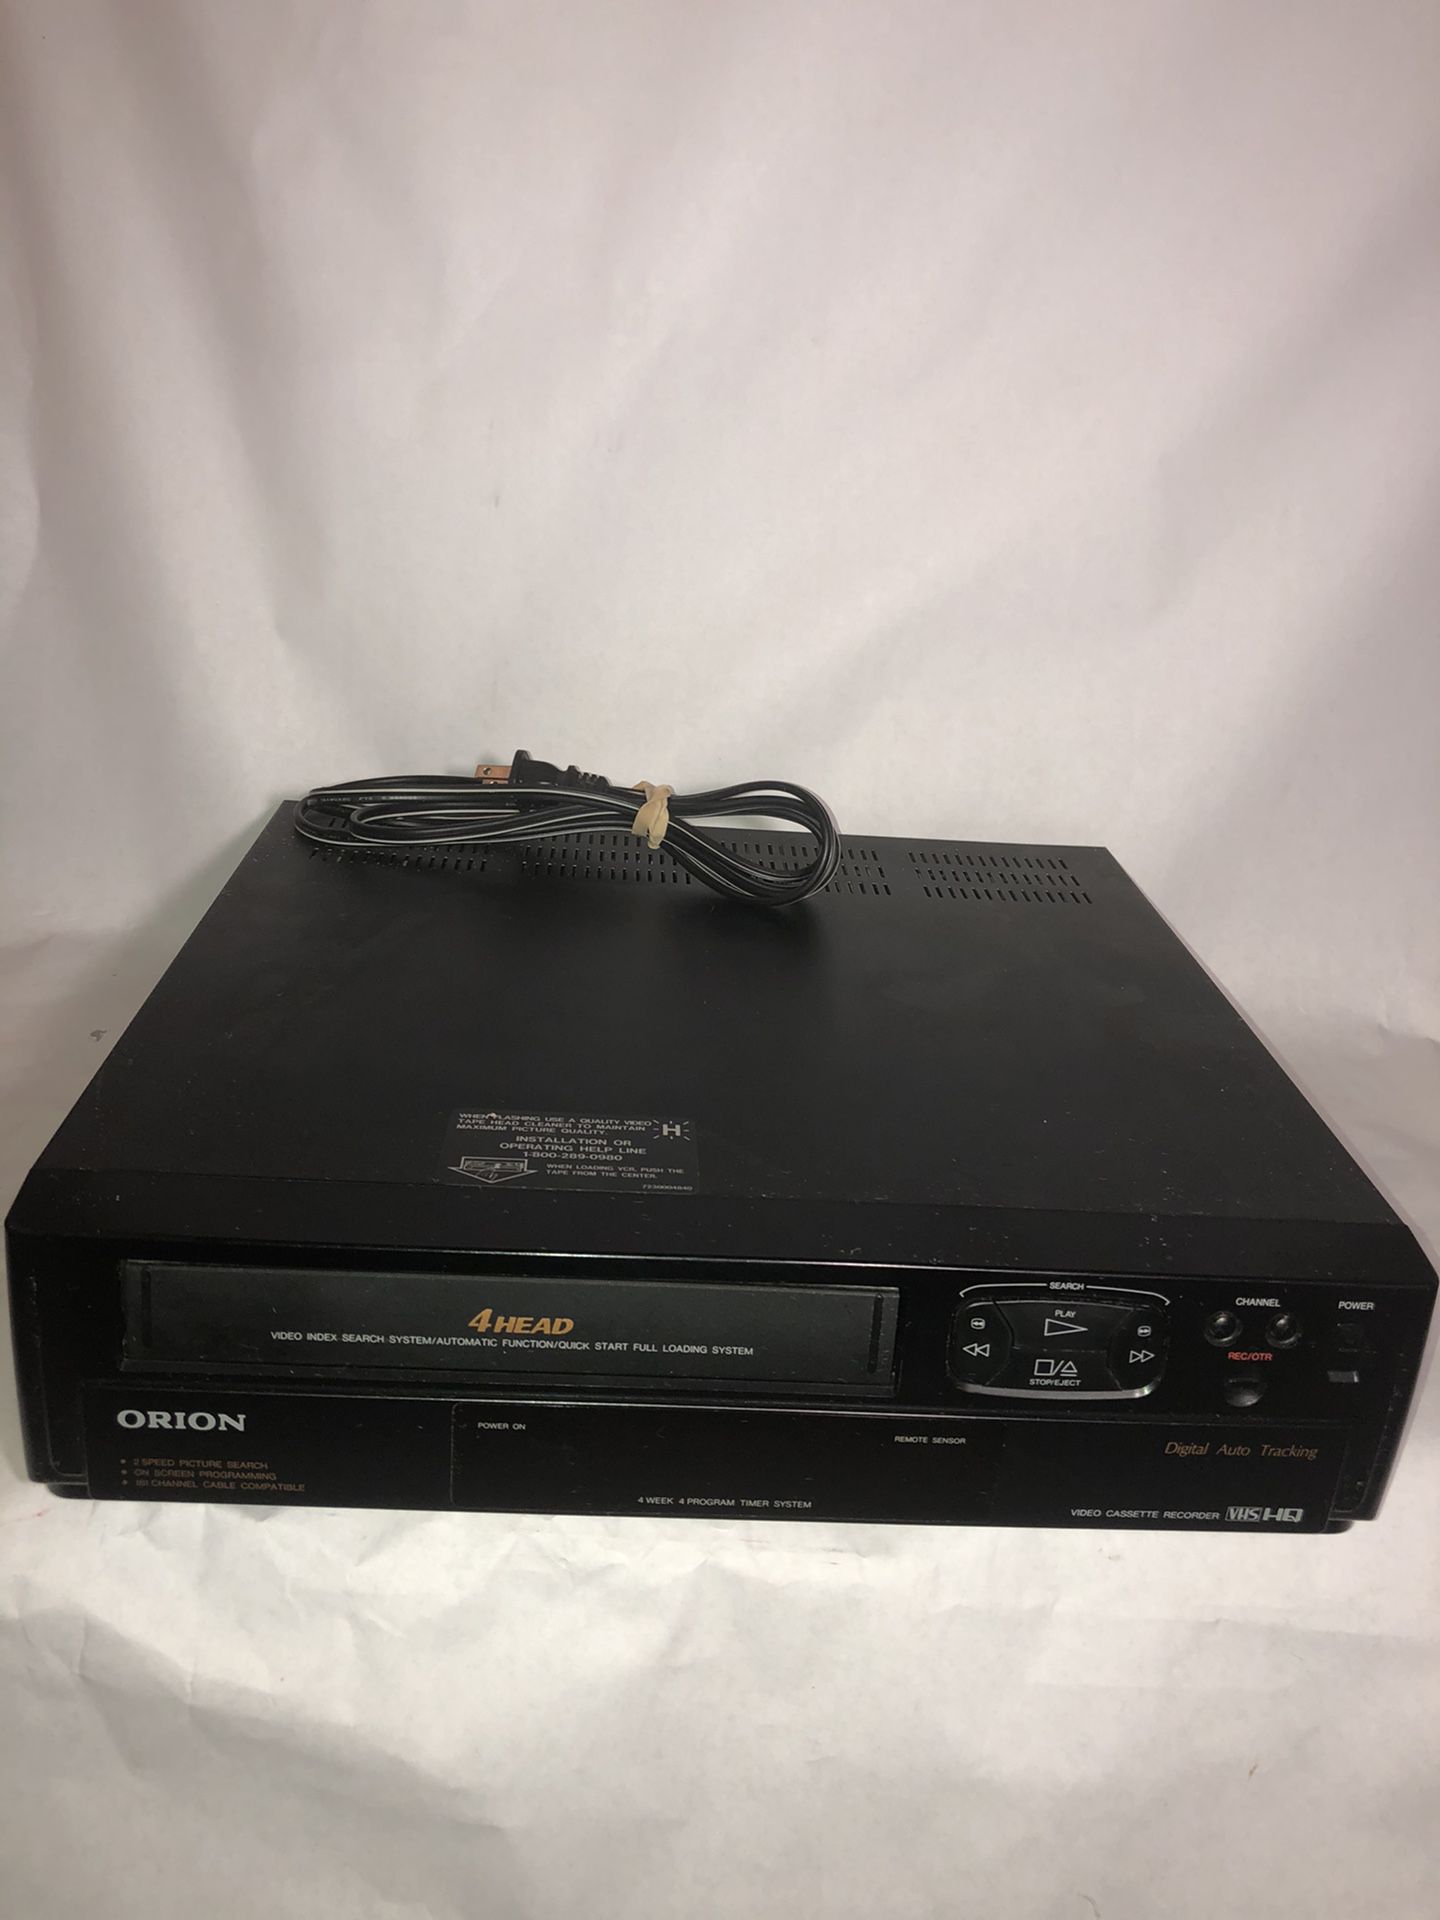 Orion VCR VHS Tape Player Recorder Home Video VRO400- Tested Working -No Remote